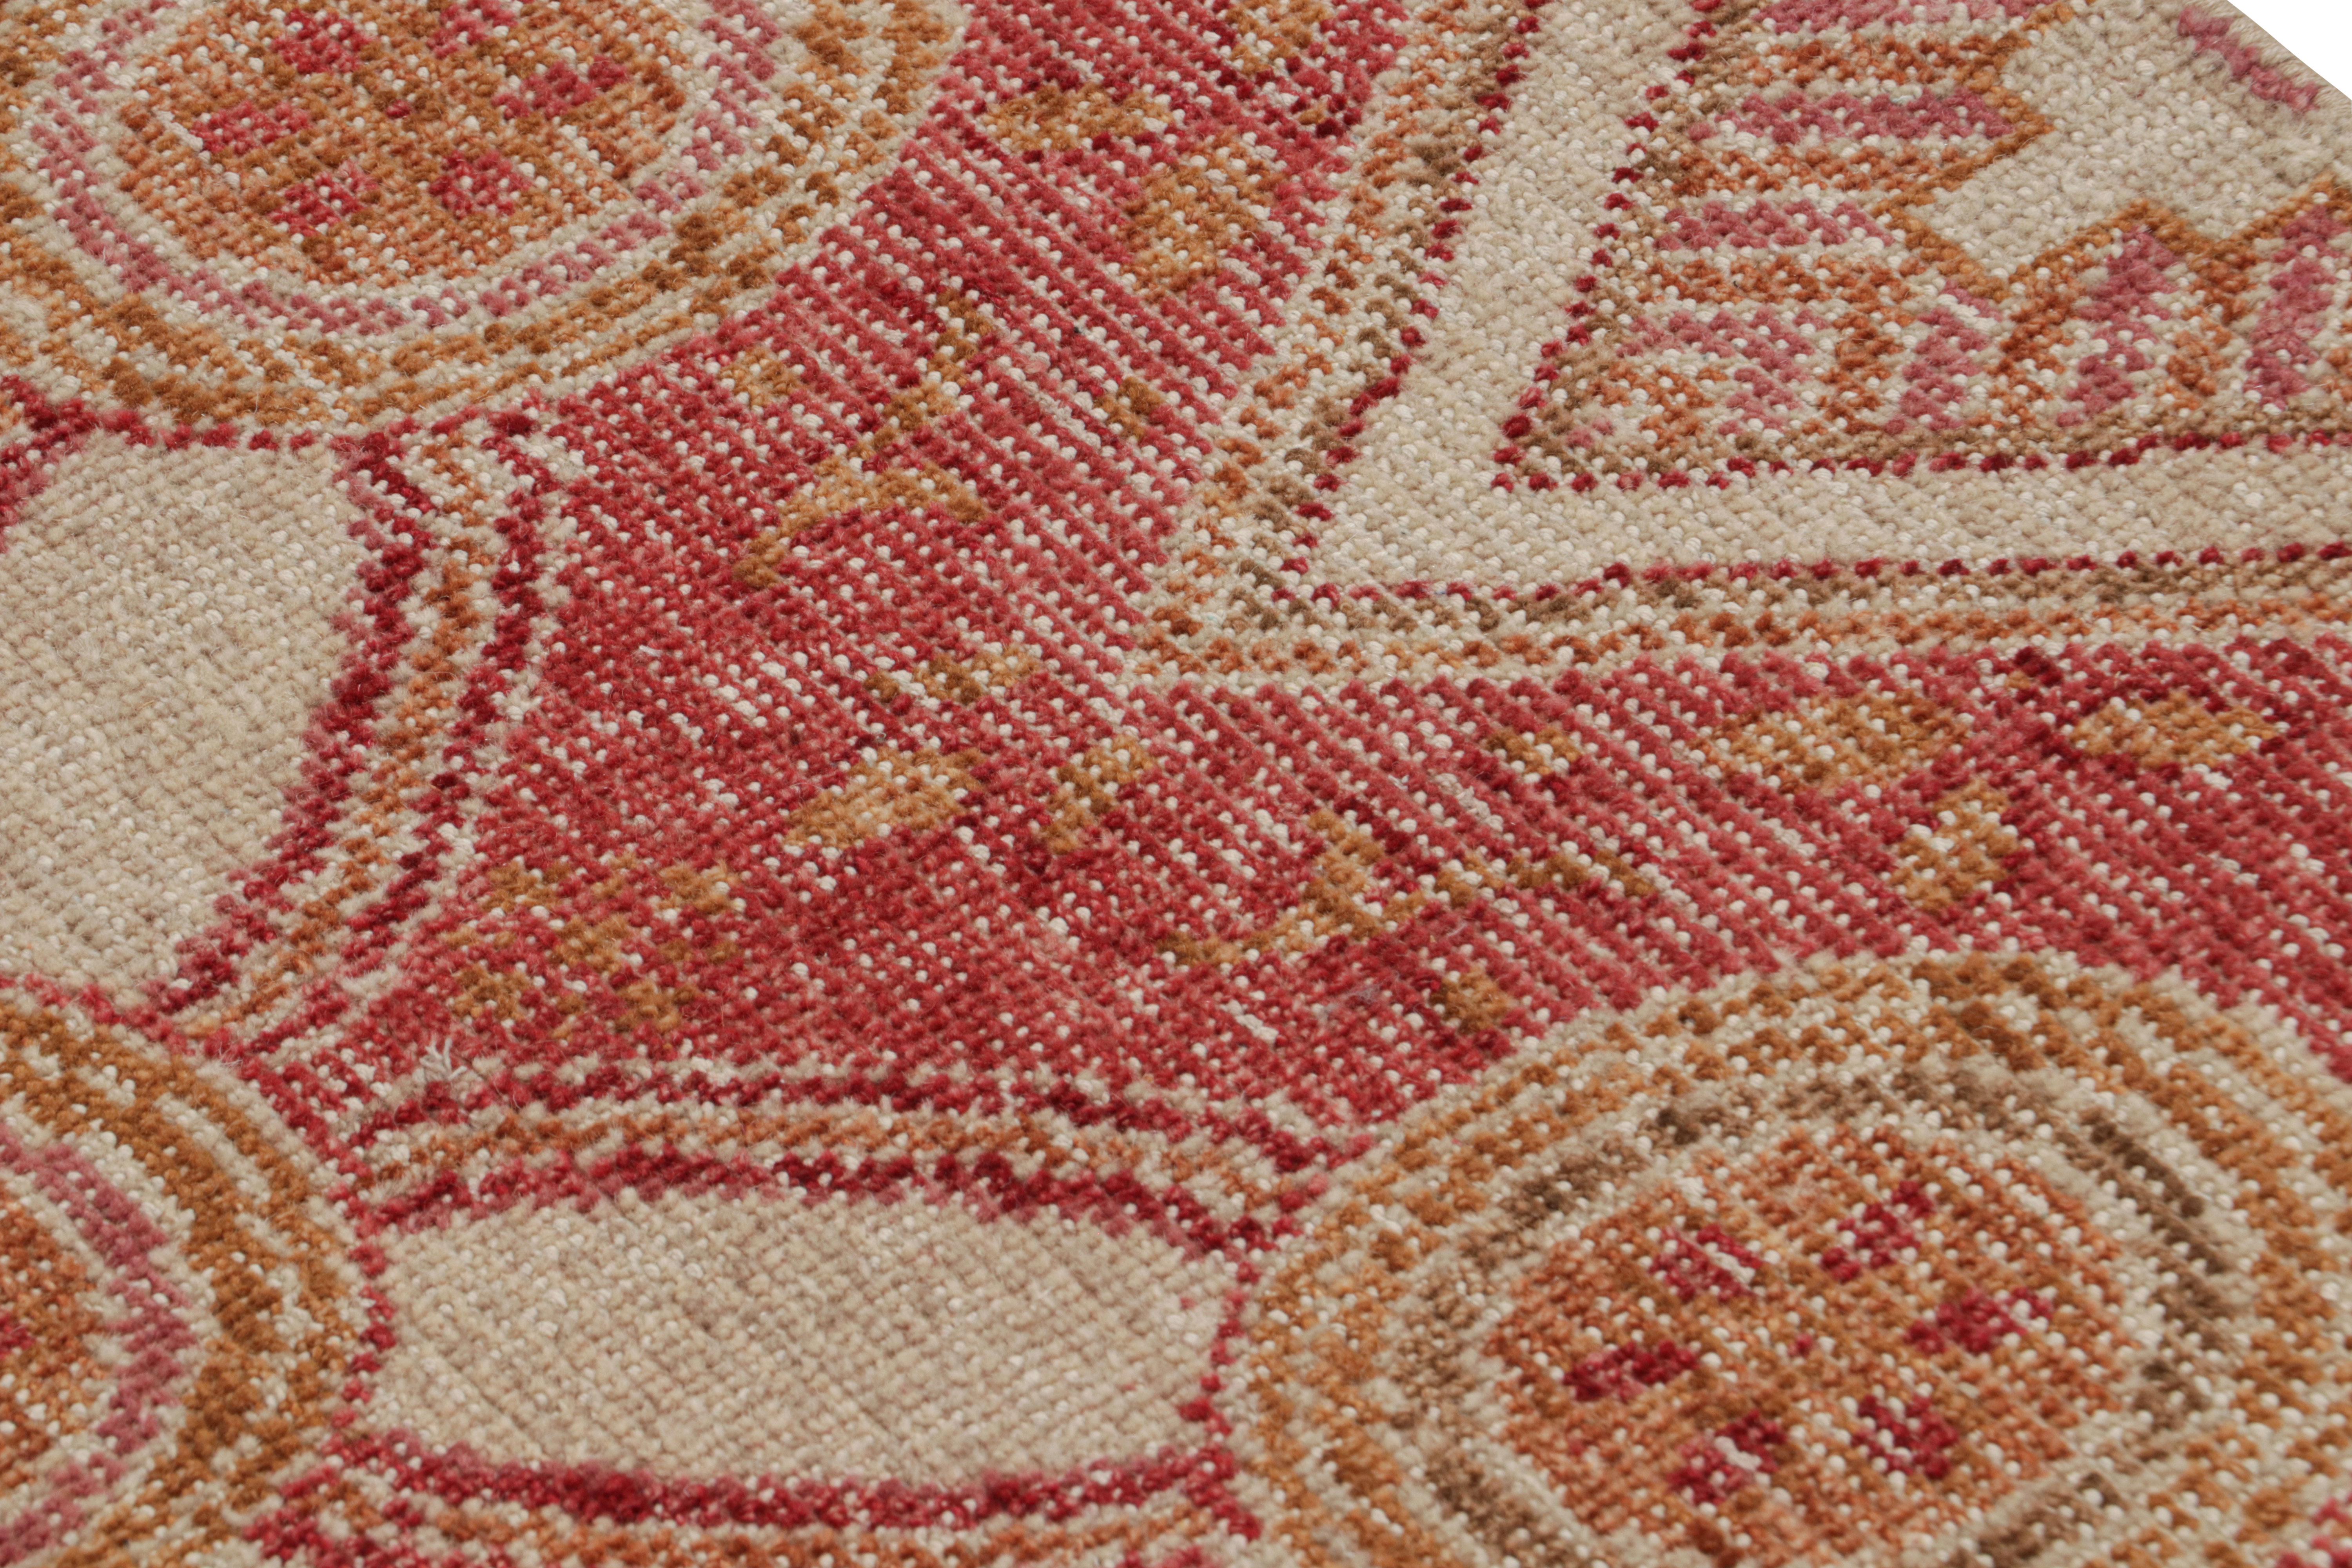 Rug & Kilim’s Distressed Style Rug in Red, Beige and Gold Geometric Patterns In New Condition For Sale In Long Island City, NY